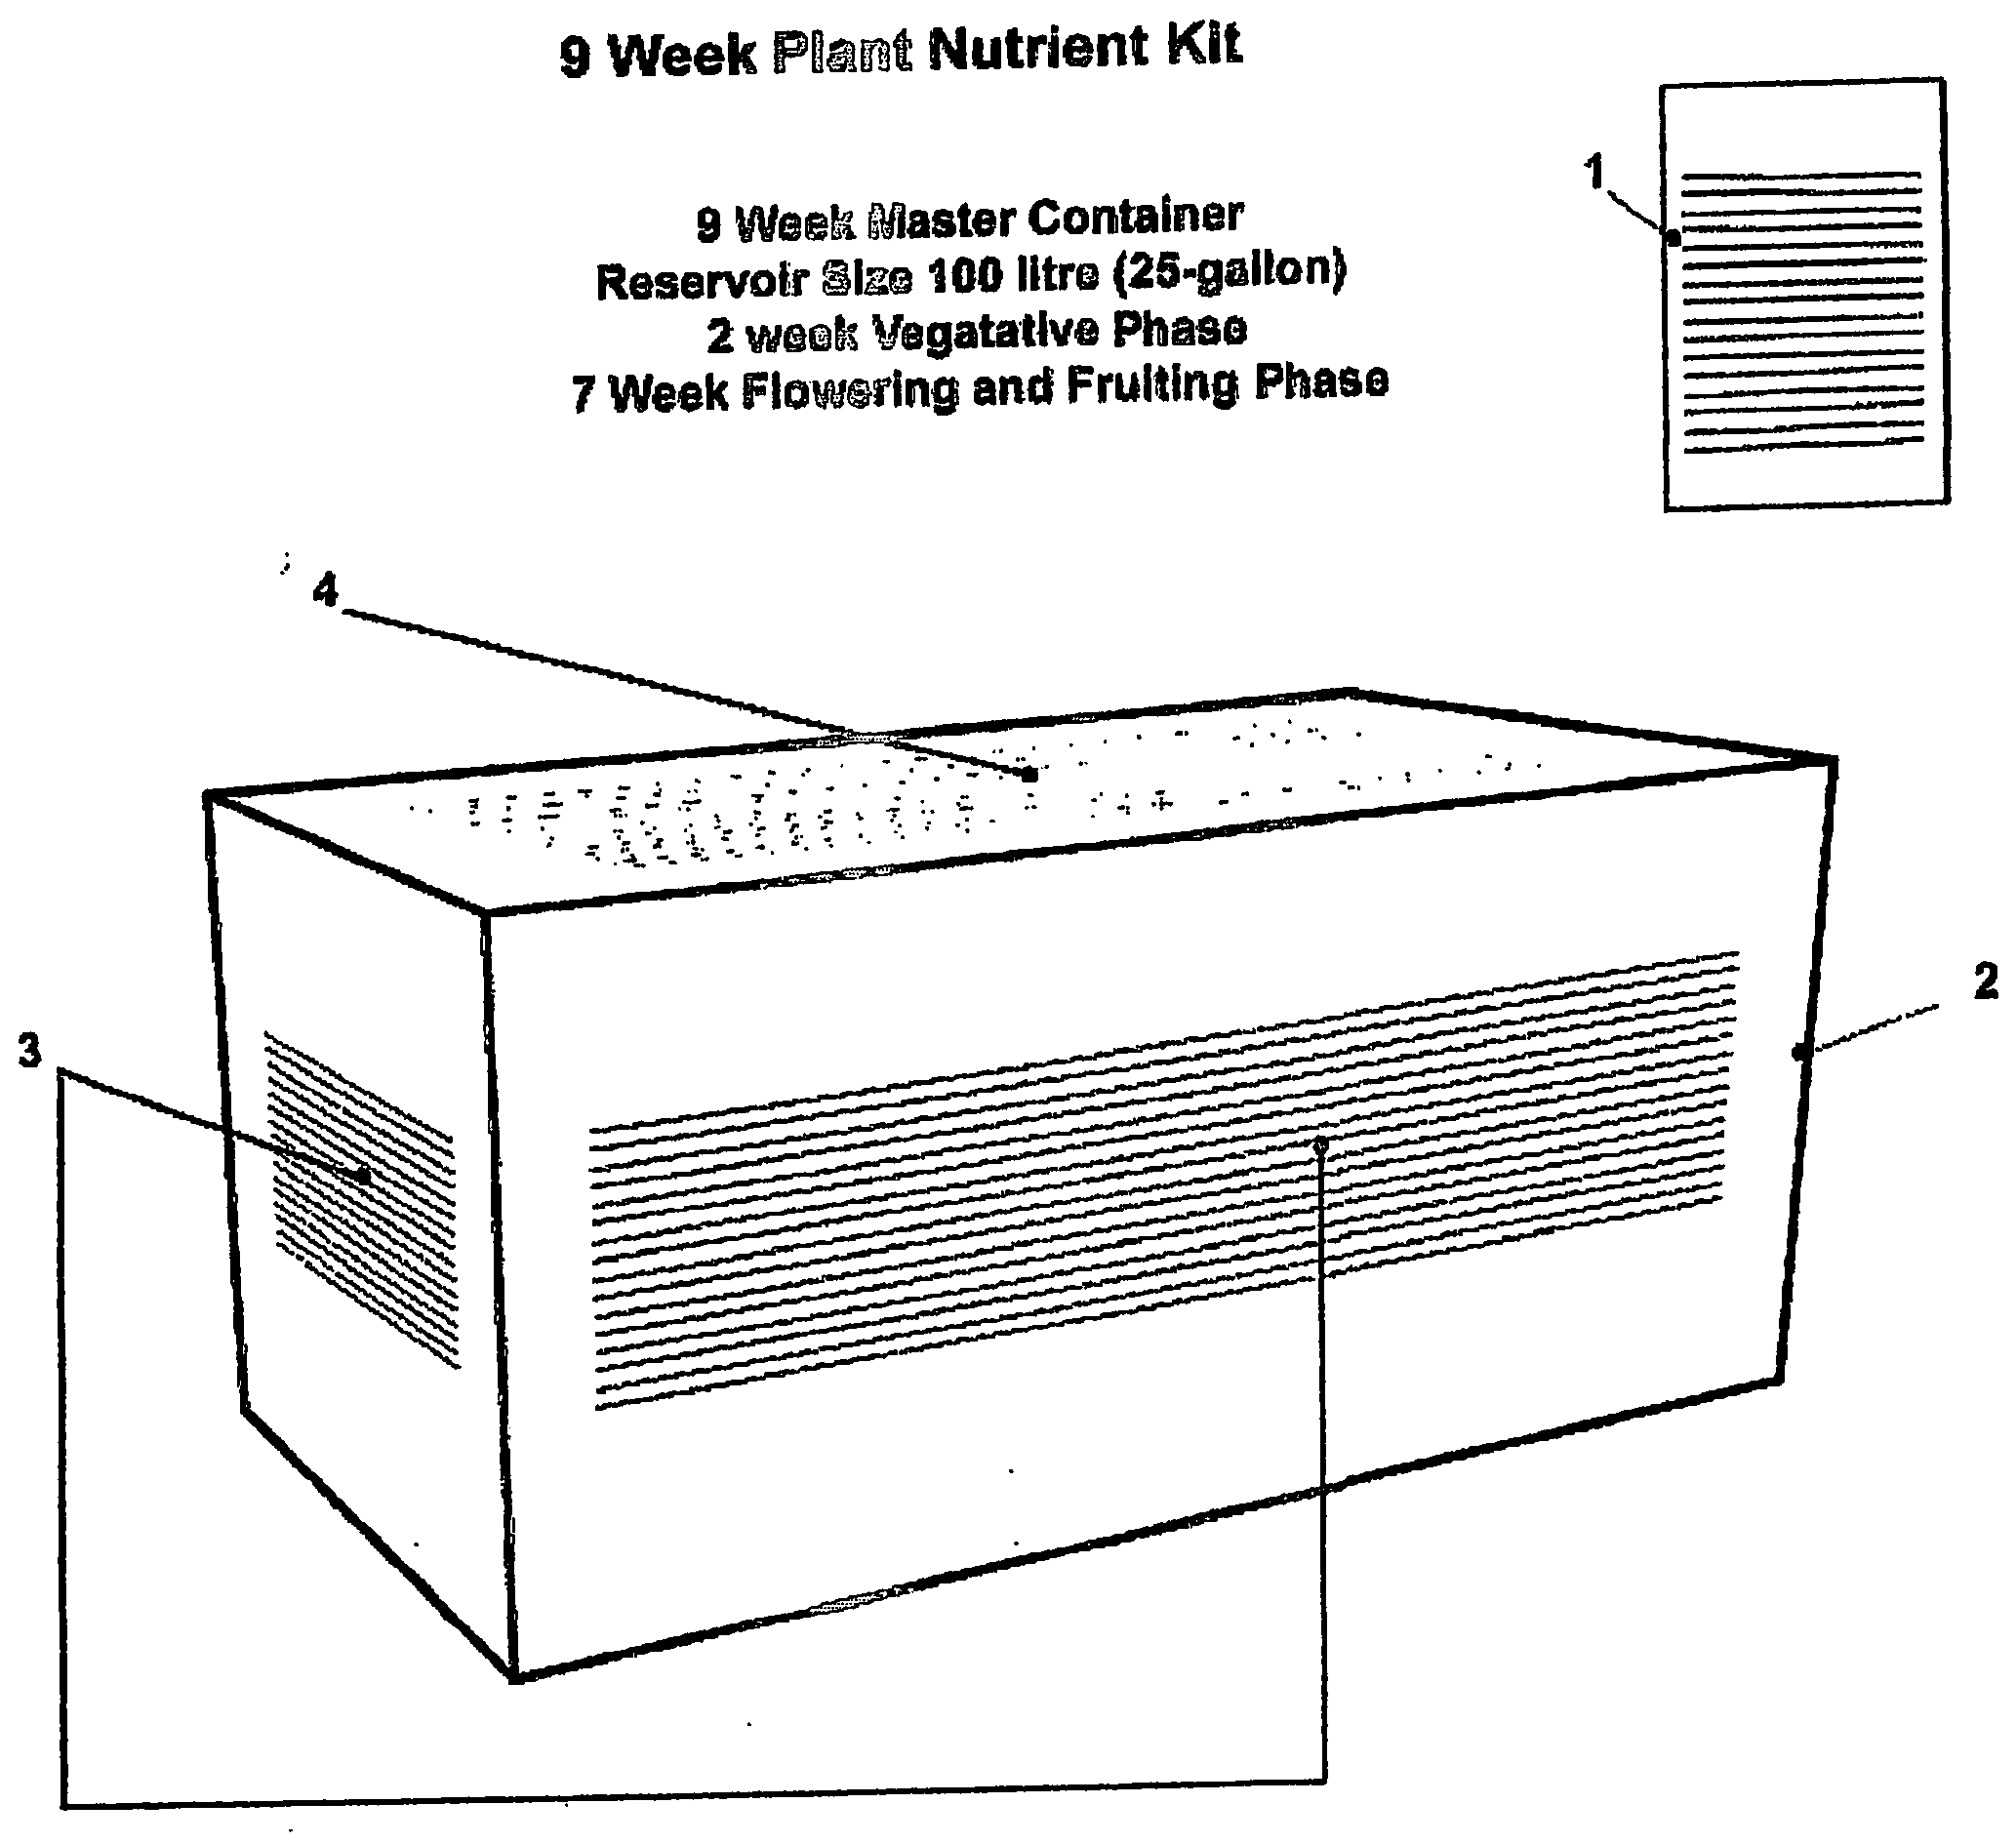 Hydroponic plant nutrient kit and method of use